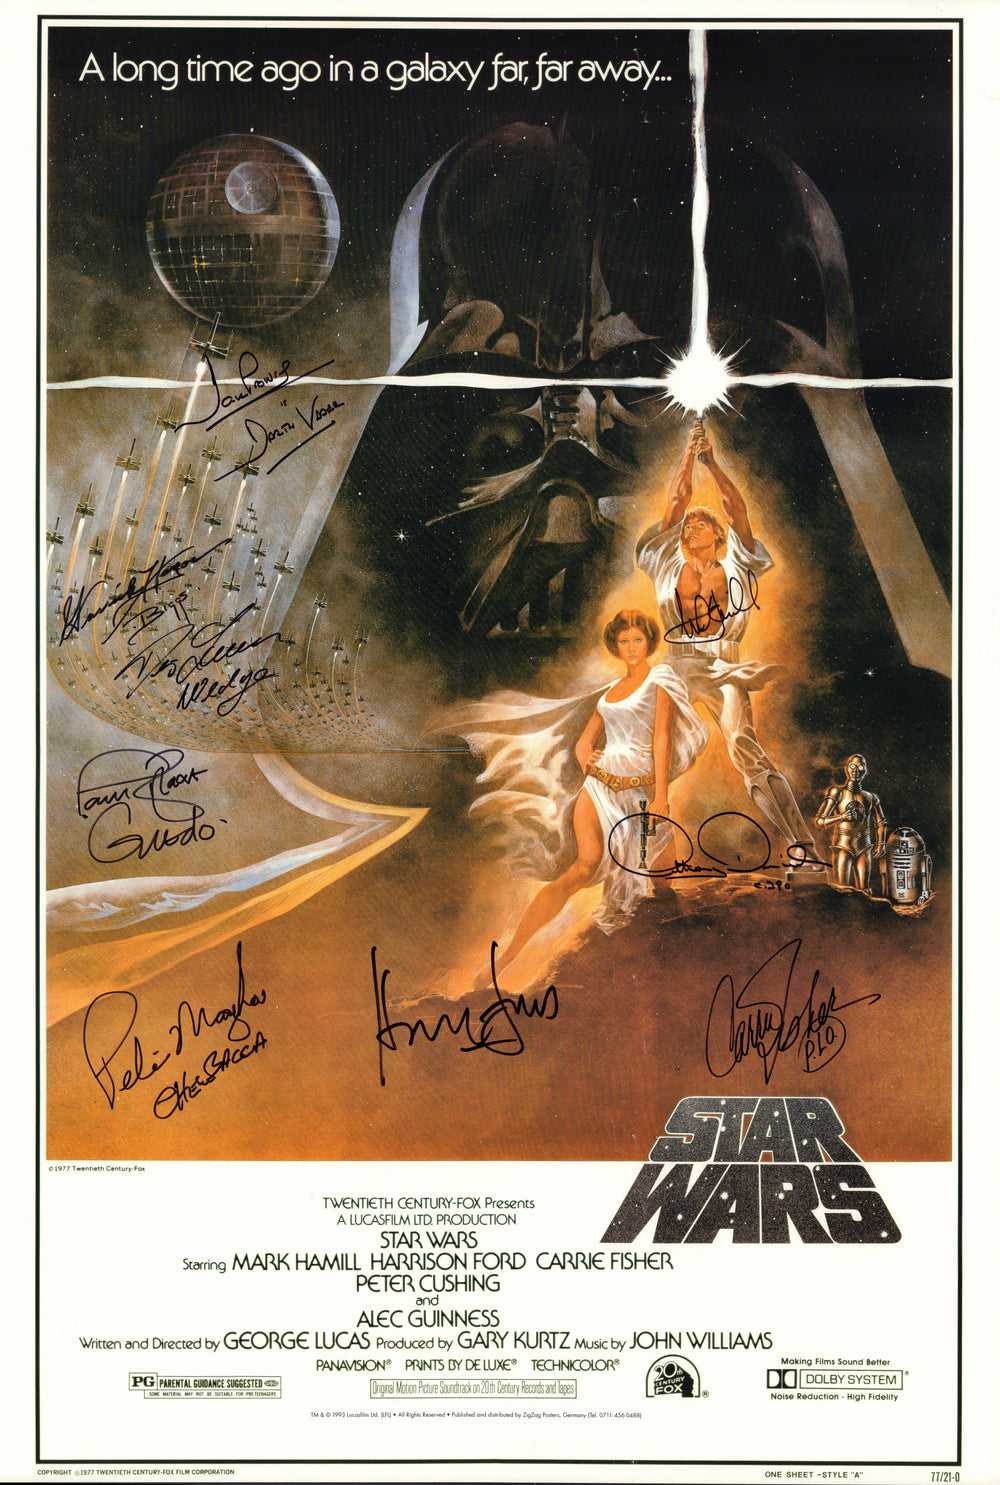 Star Wars: A New Hope 27x40 Poster Signed by Harrison Ford, Carrie Fisher, Mark Hamill, Peter Mayhew, Anthony Daniels, & Dave Prowse